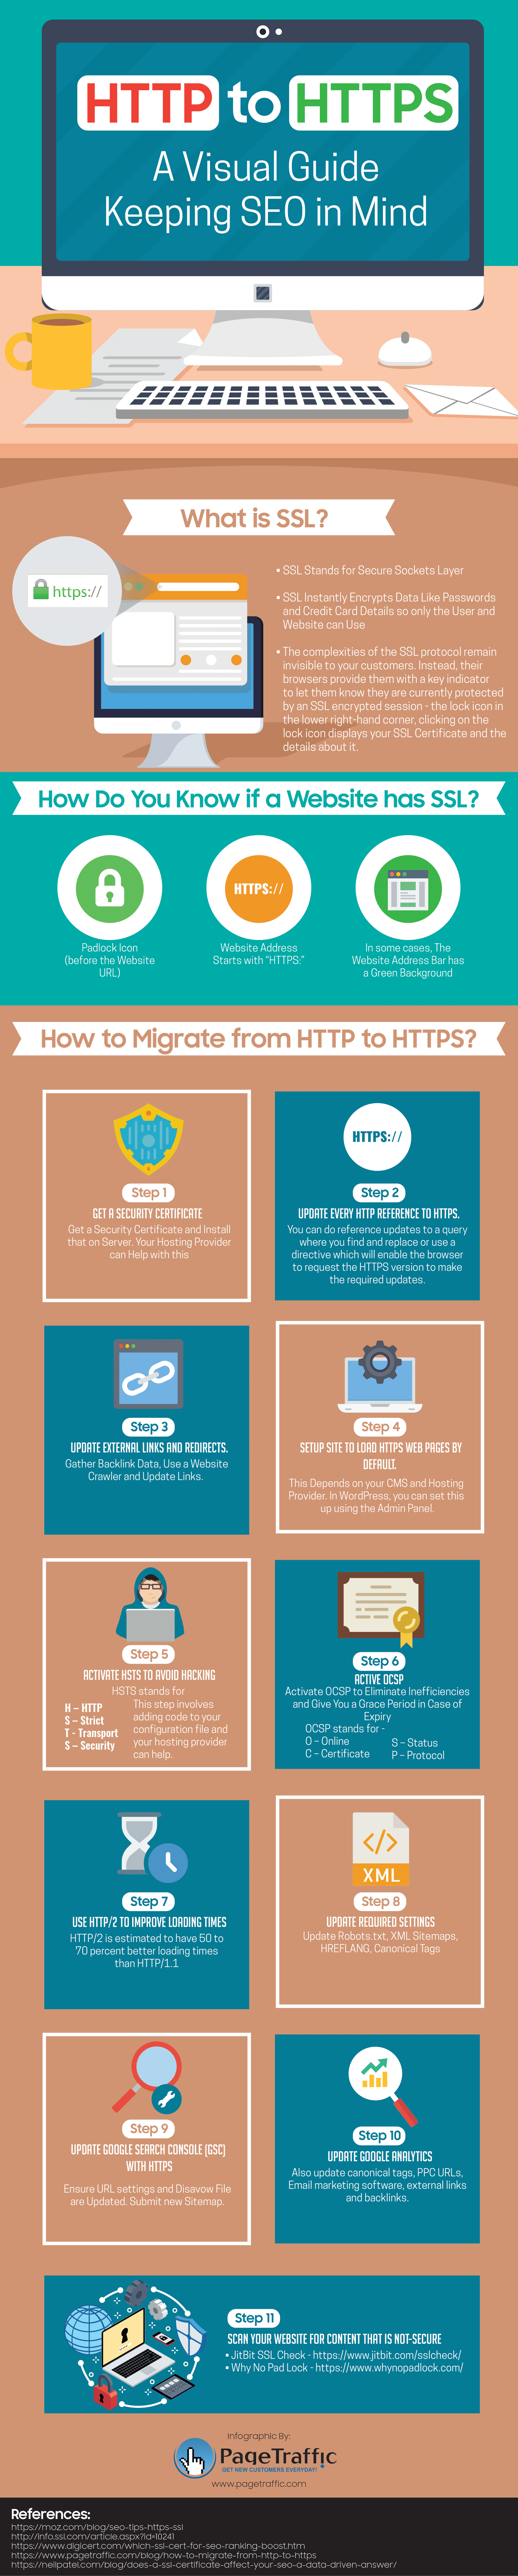 HTTP-to-HTTPS-A-Visual-Guide-Keeping-SEO-in-Mind-Infographic